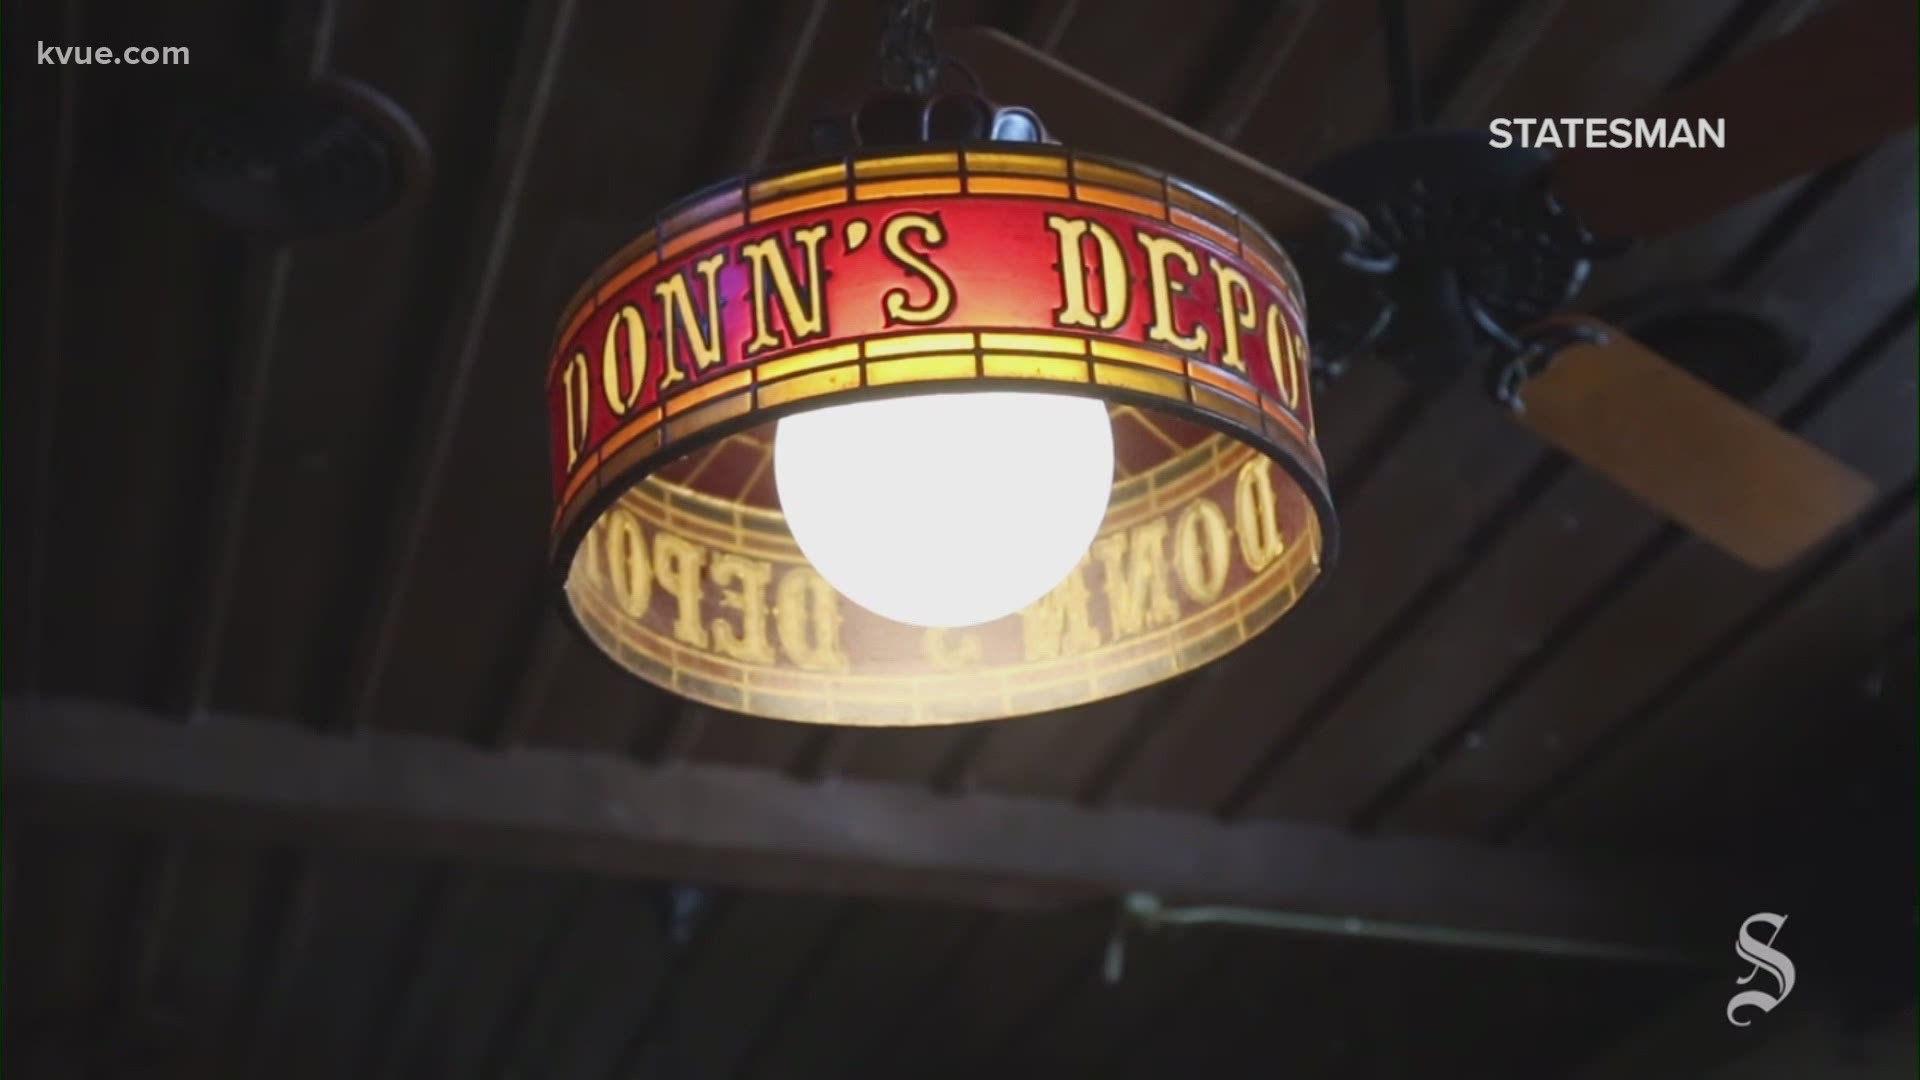 Donn's Dept in Downtown Austin is asking the community for help to stay in business.